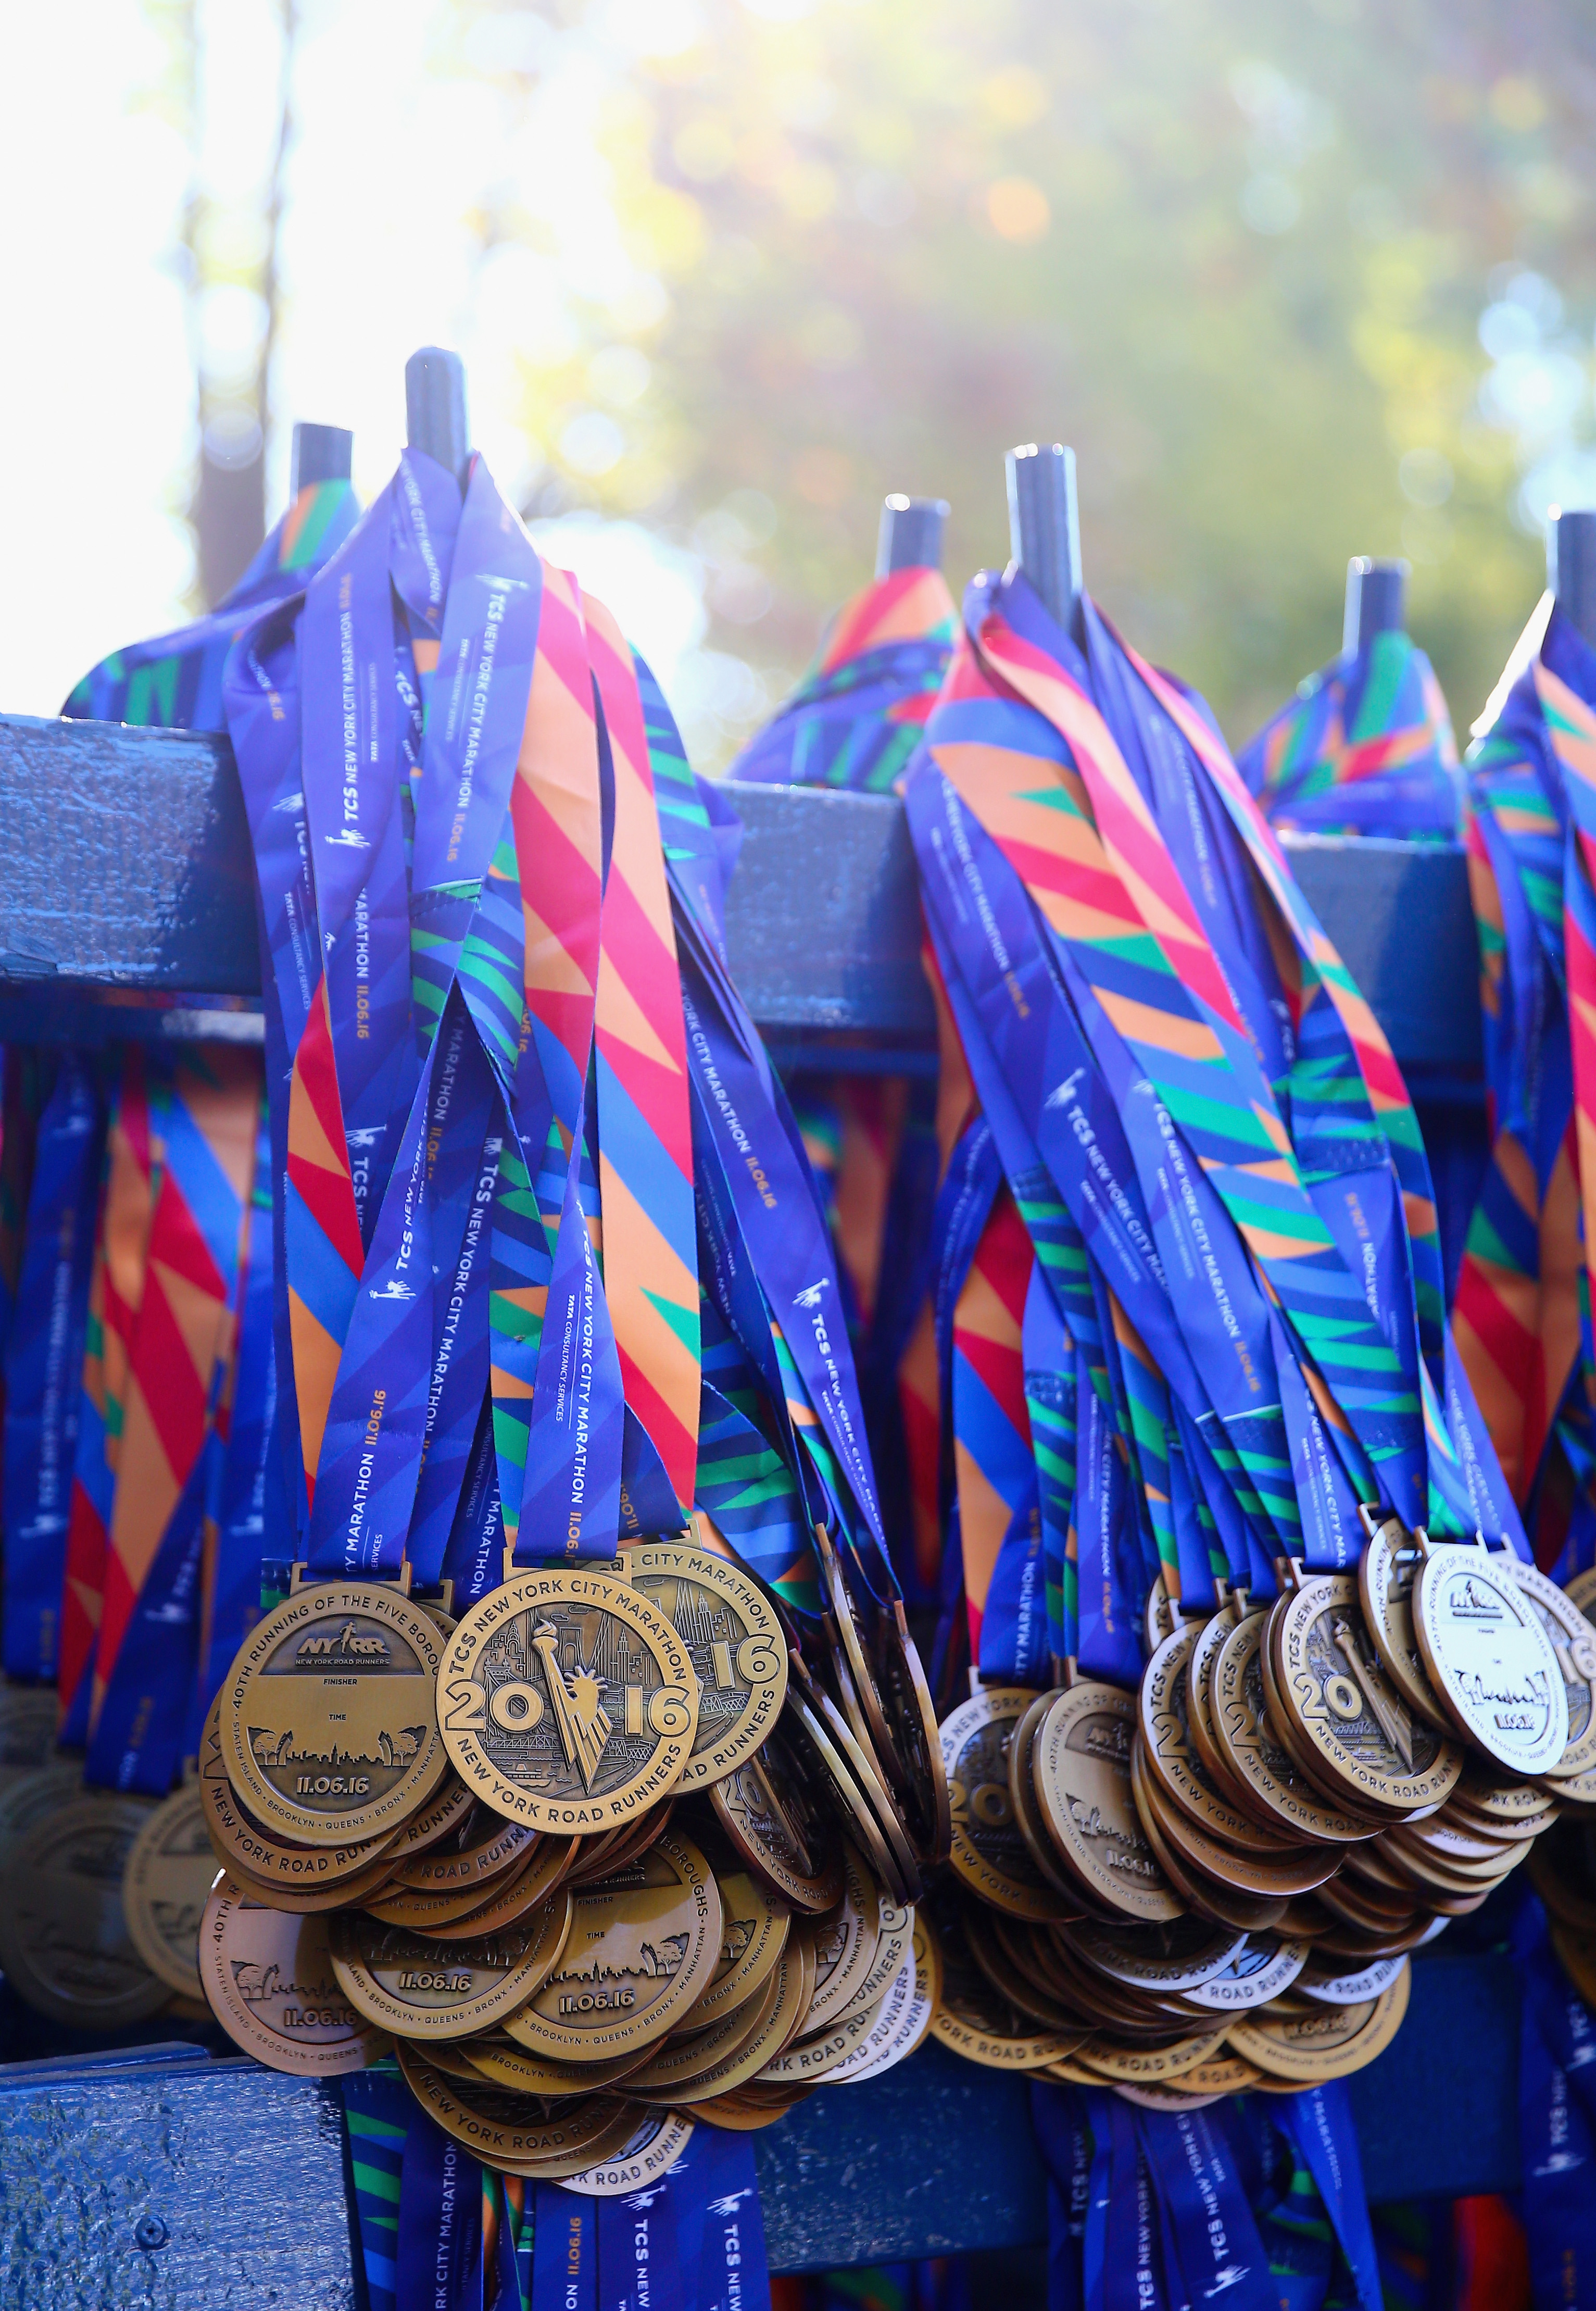 These are the medals you get if you complete the NYC Marathon For The Win